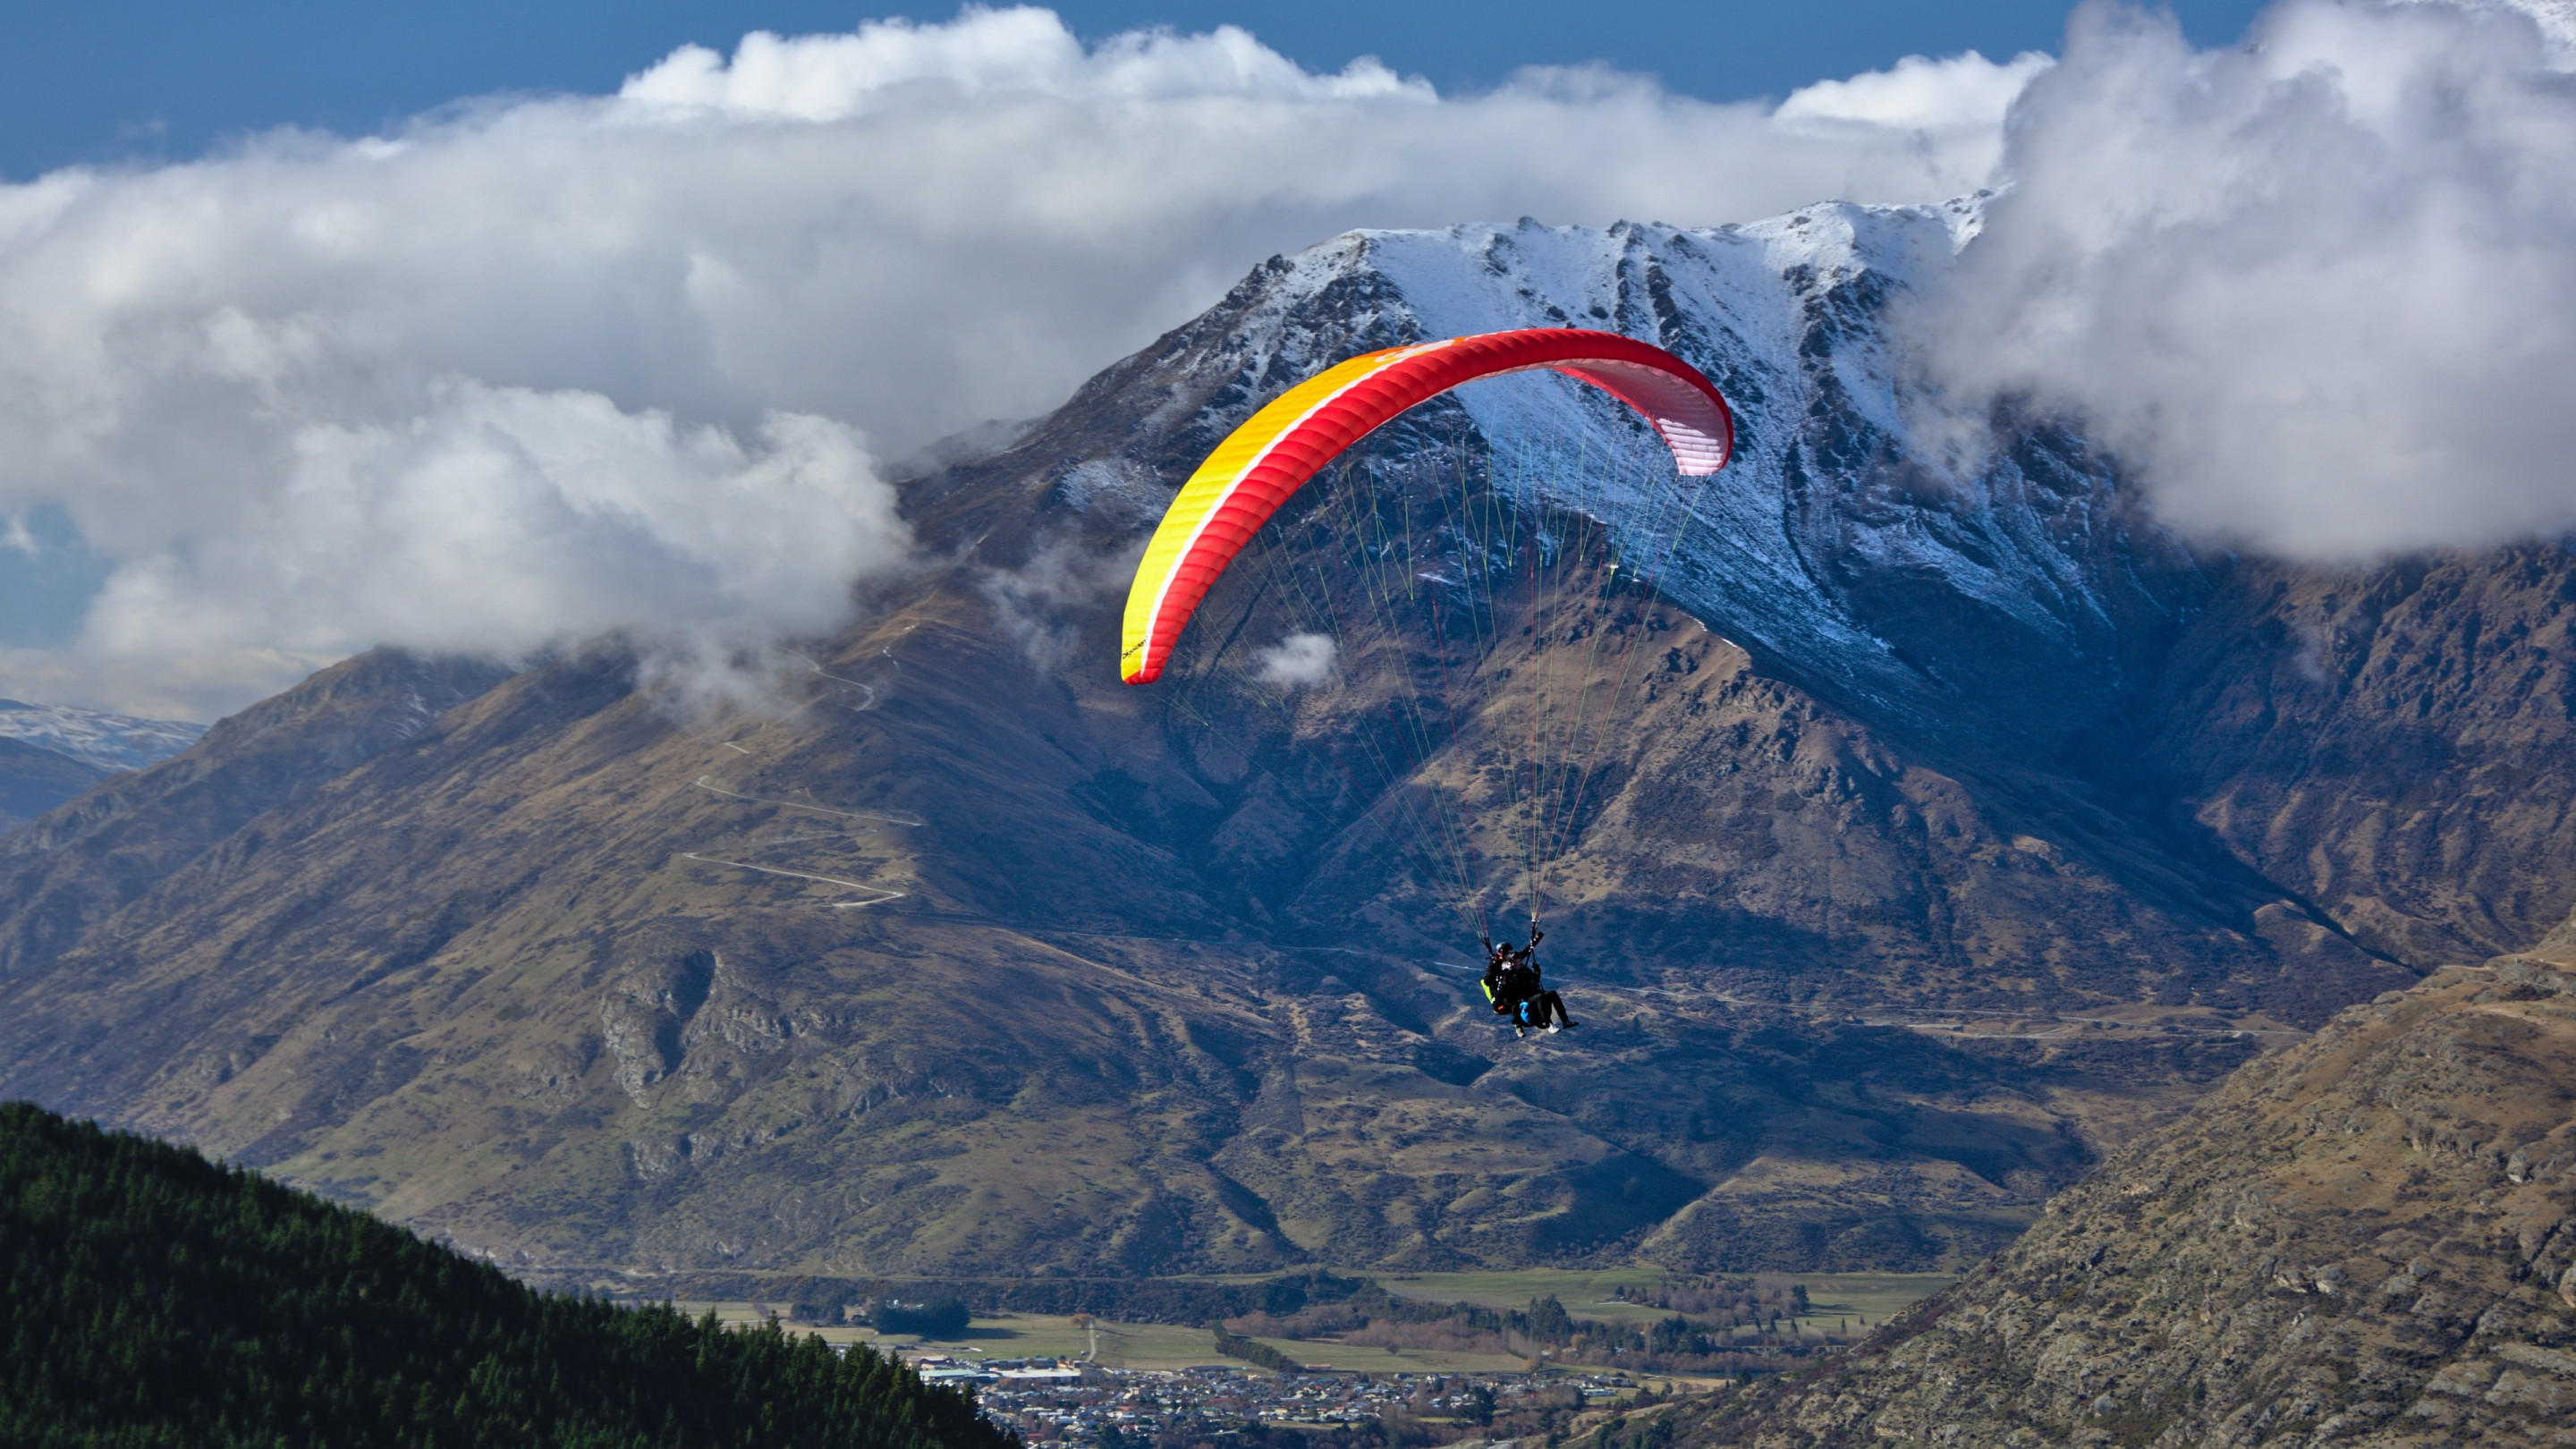 Paraglider up in the sky wallpaper 2880x1620